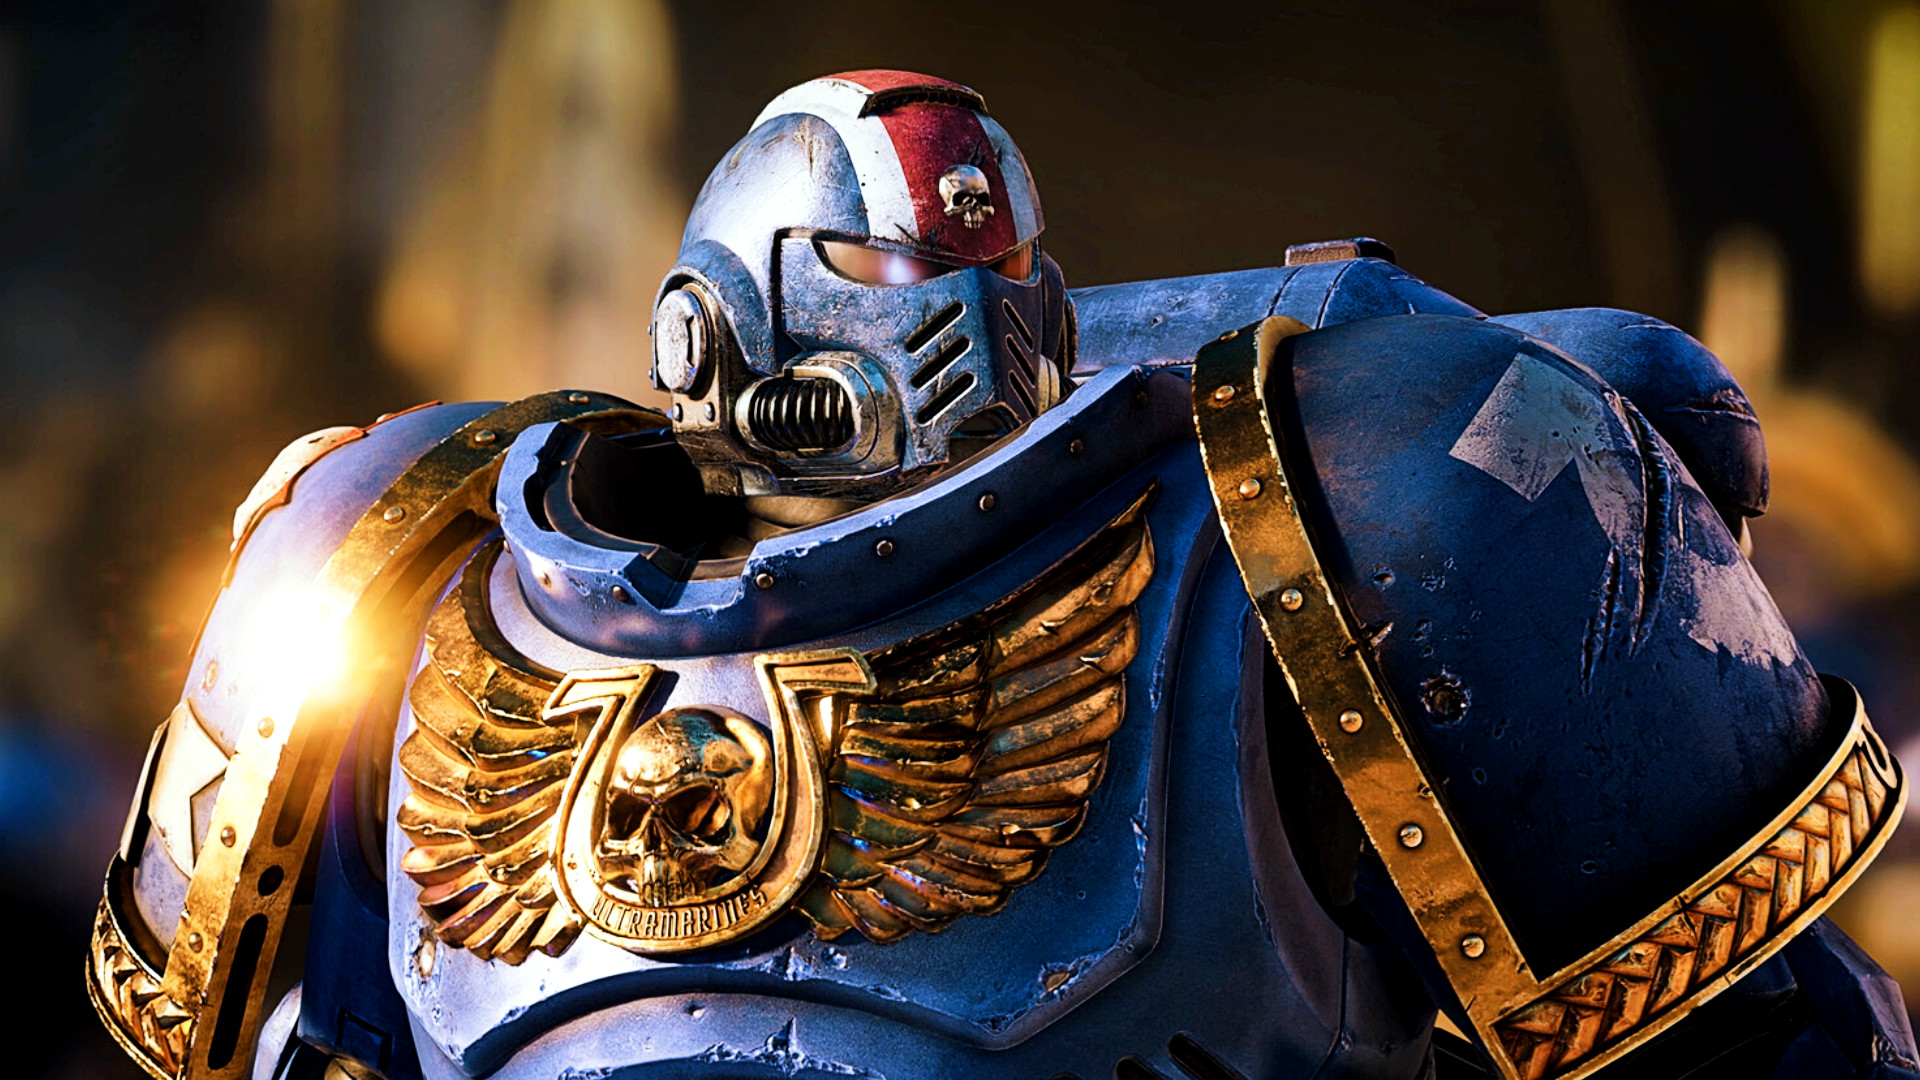 Warhammer 40k Space Marine 2 is a serious Starship Troopers